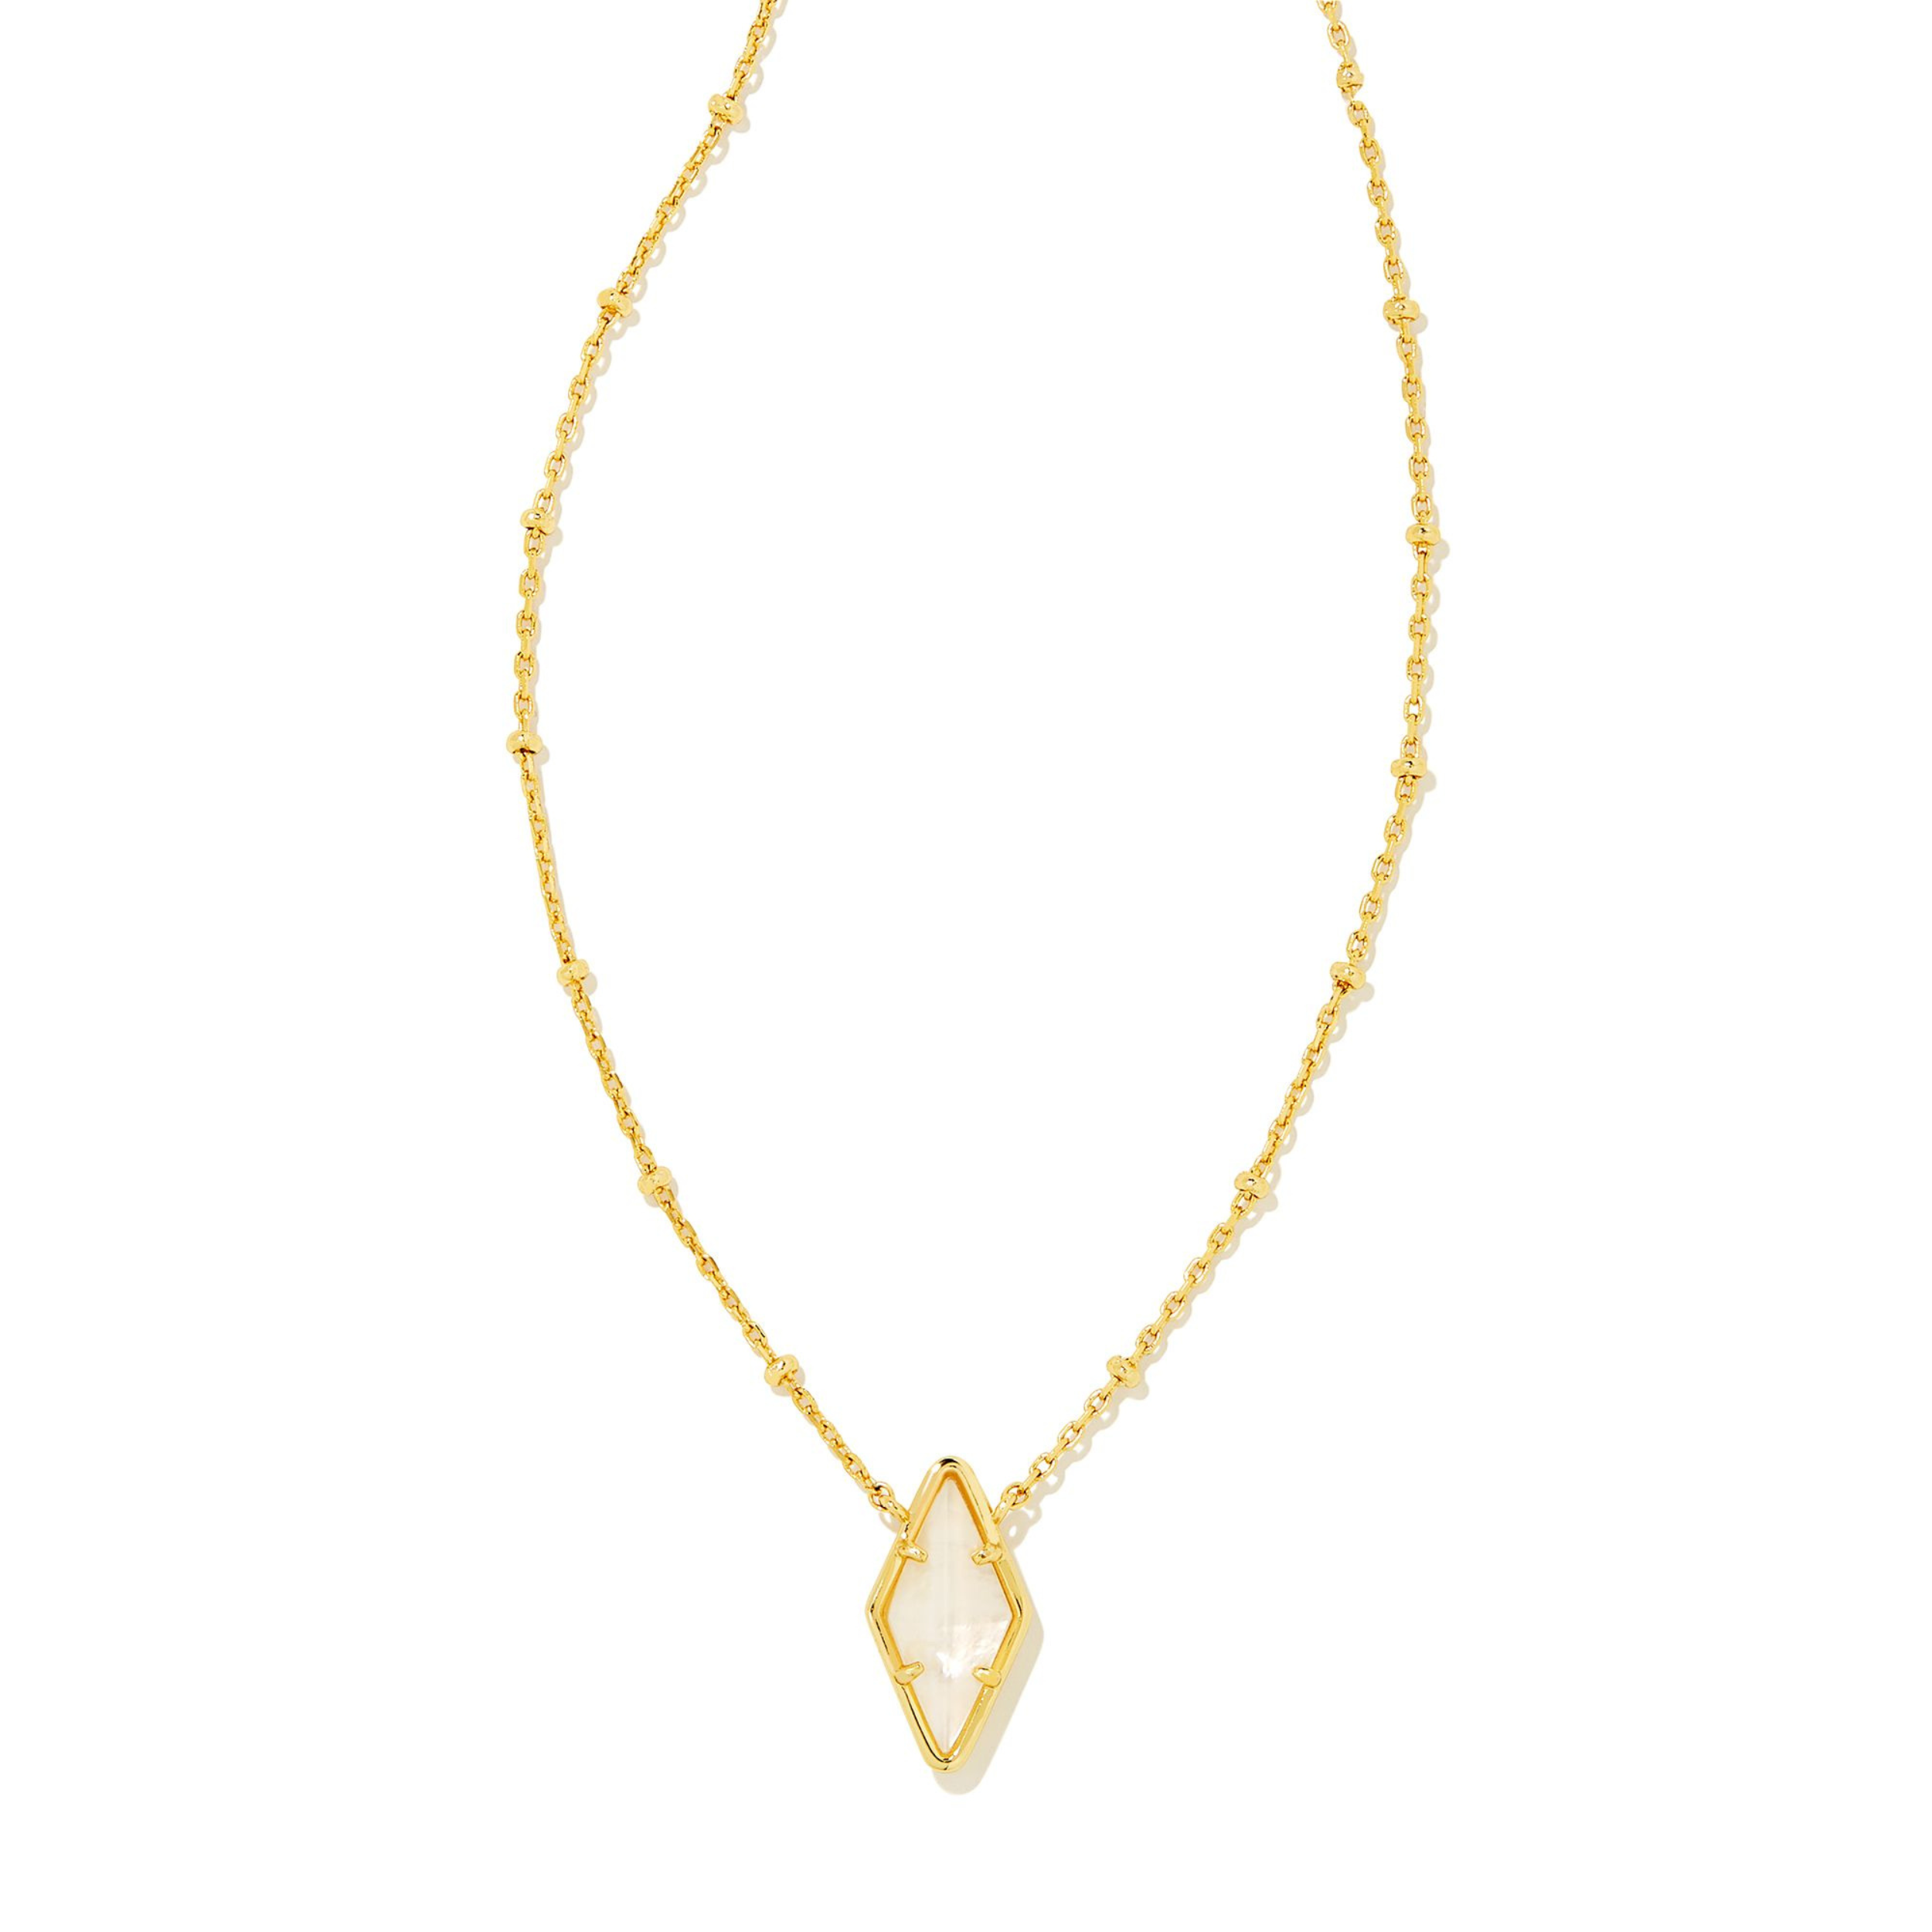 Gold necklace with diamond shaped pendant in ivory mother of pearl pictured on a white background.